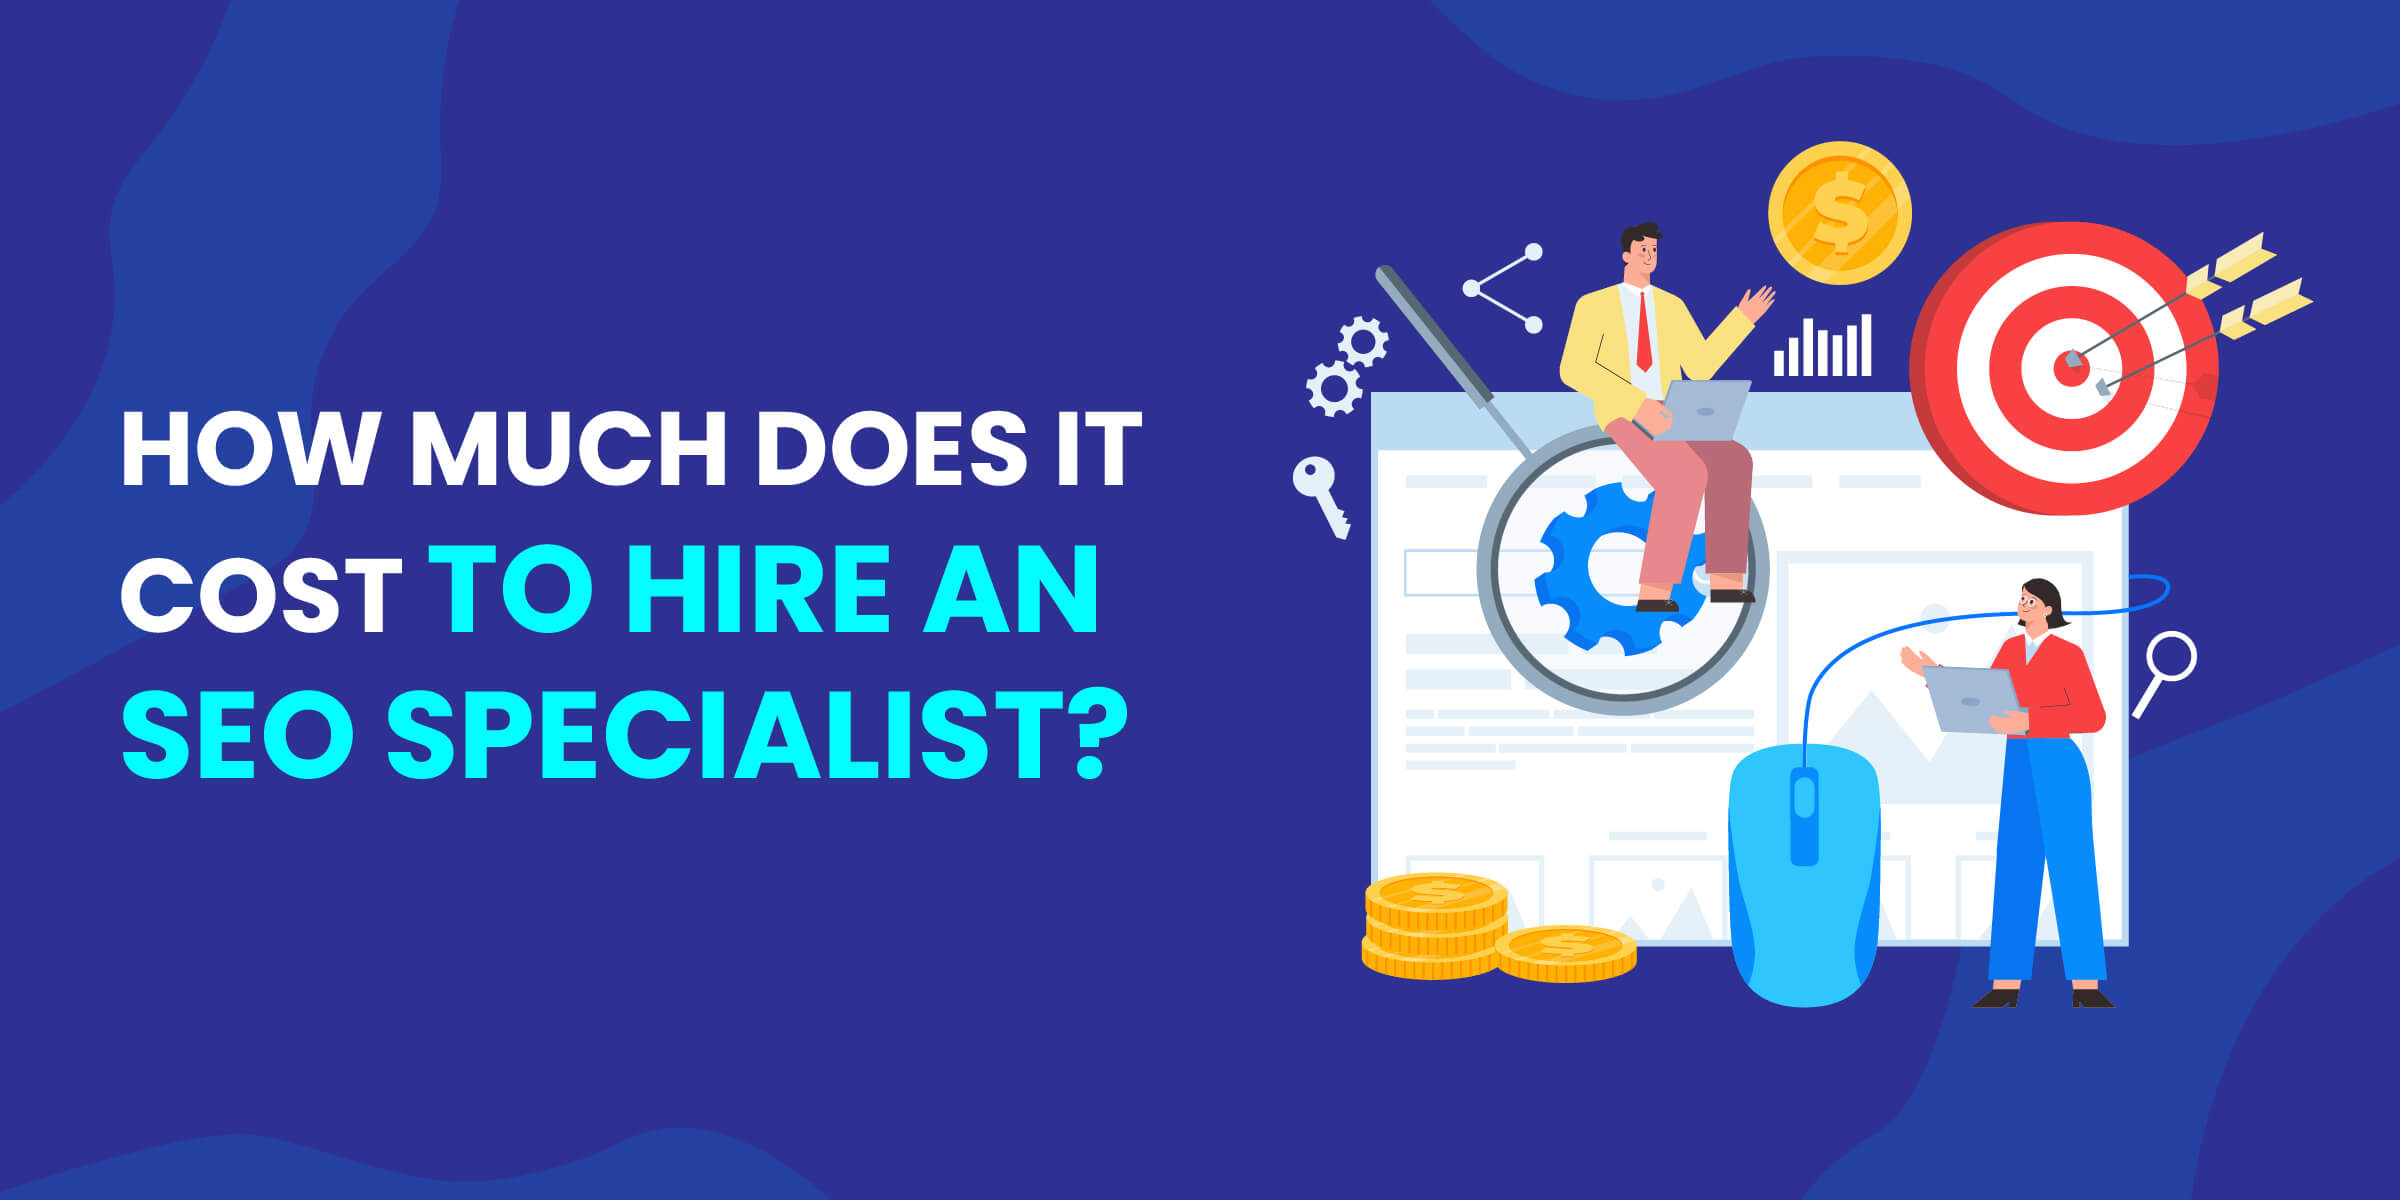 How Much Does It Cost to Hire SEO Specialist